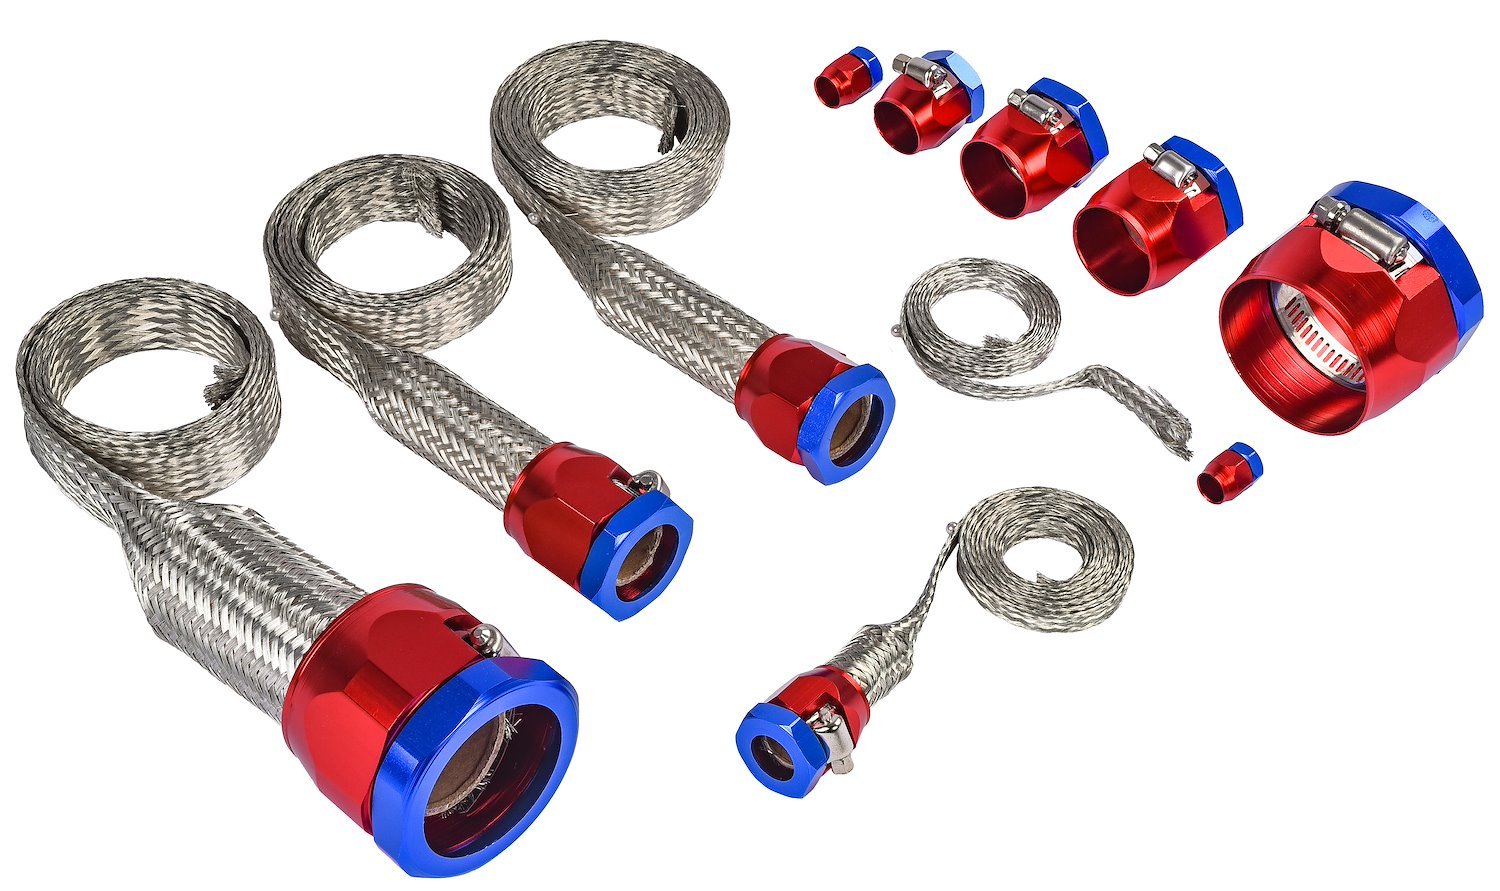 JEGS 50533: Braided Hose Sleeving Kit Includes: Stainless Steel  Cut-to-Length Sleeving, (2) Fuel Line Clamps, (2) Vacuum Line Clamps, (2) Radiator  Hose Clamps, (2) 5/8 in. Heater Hose Clamps, (2) 3/4 in.